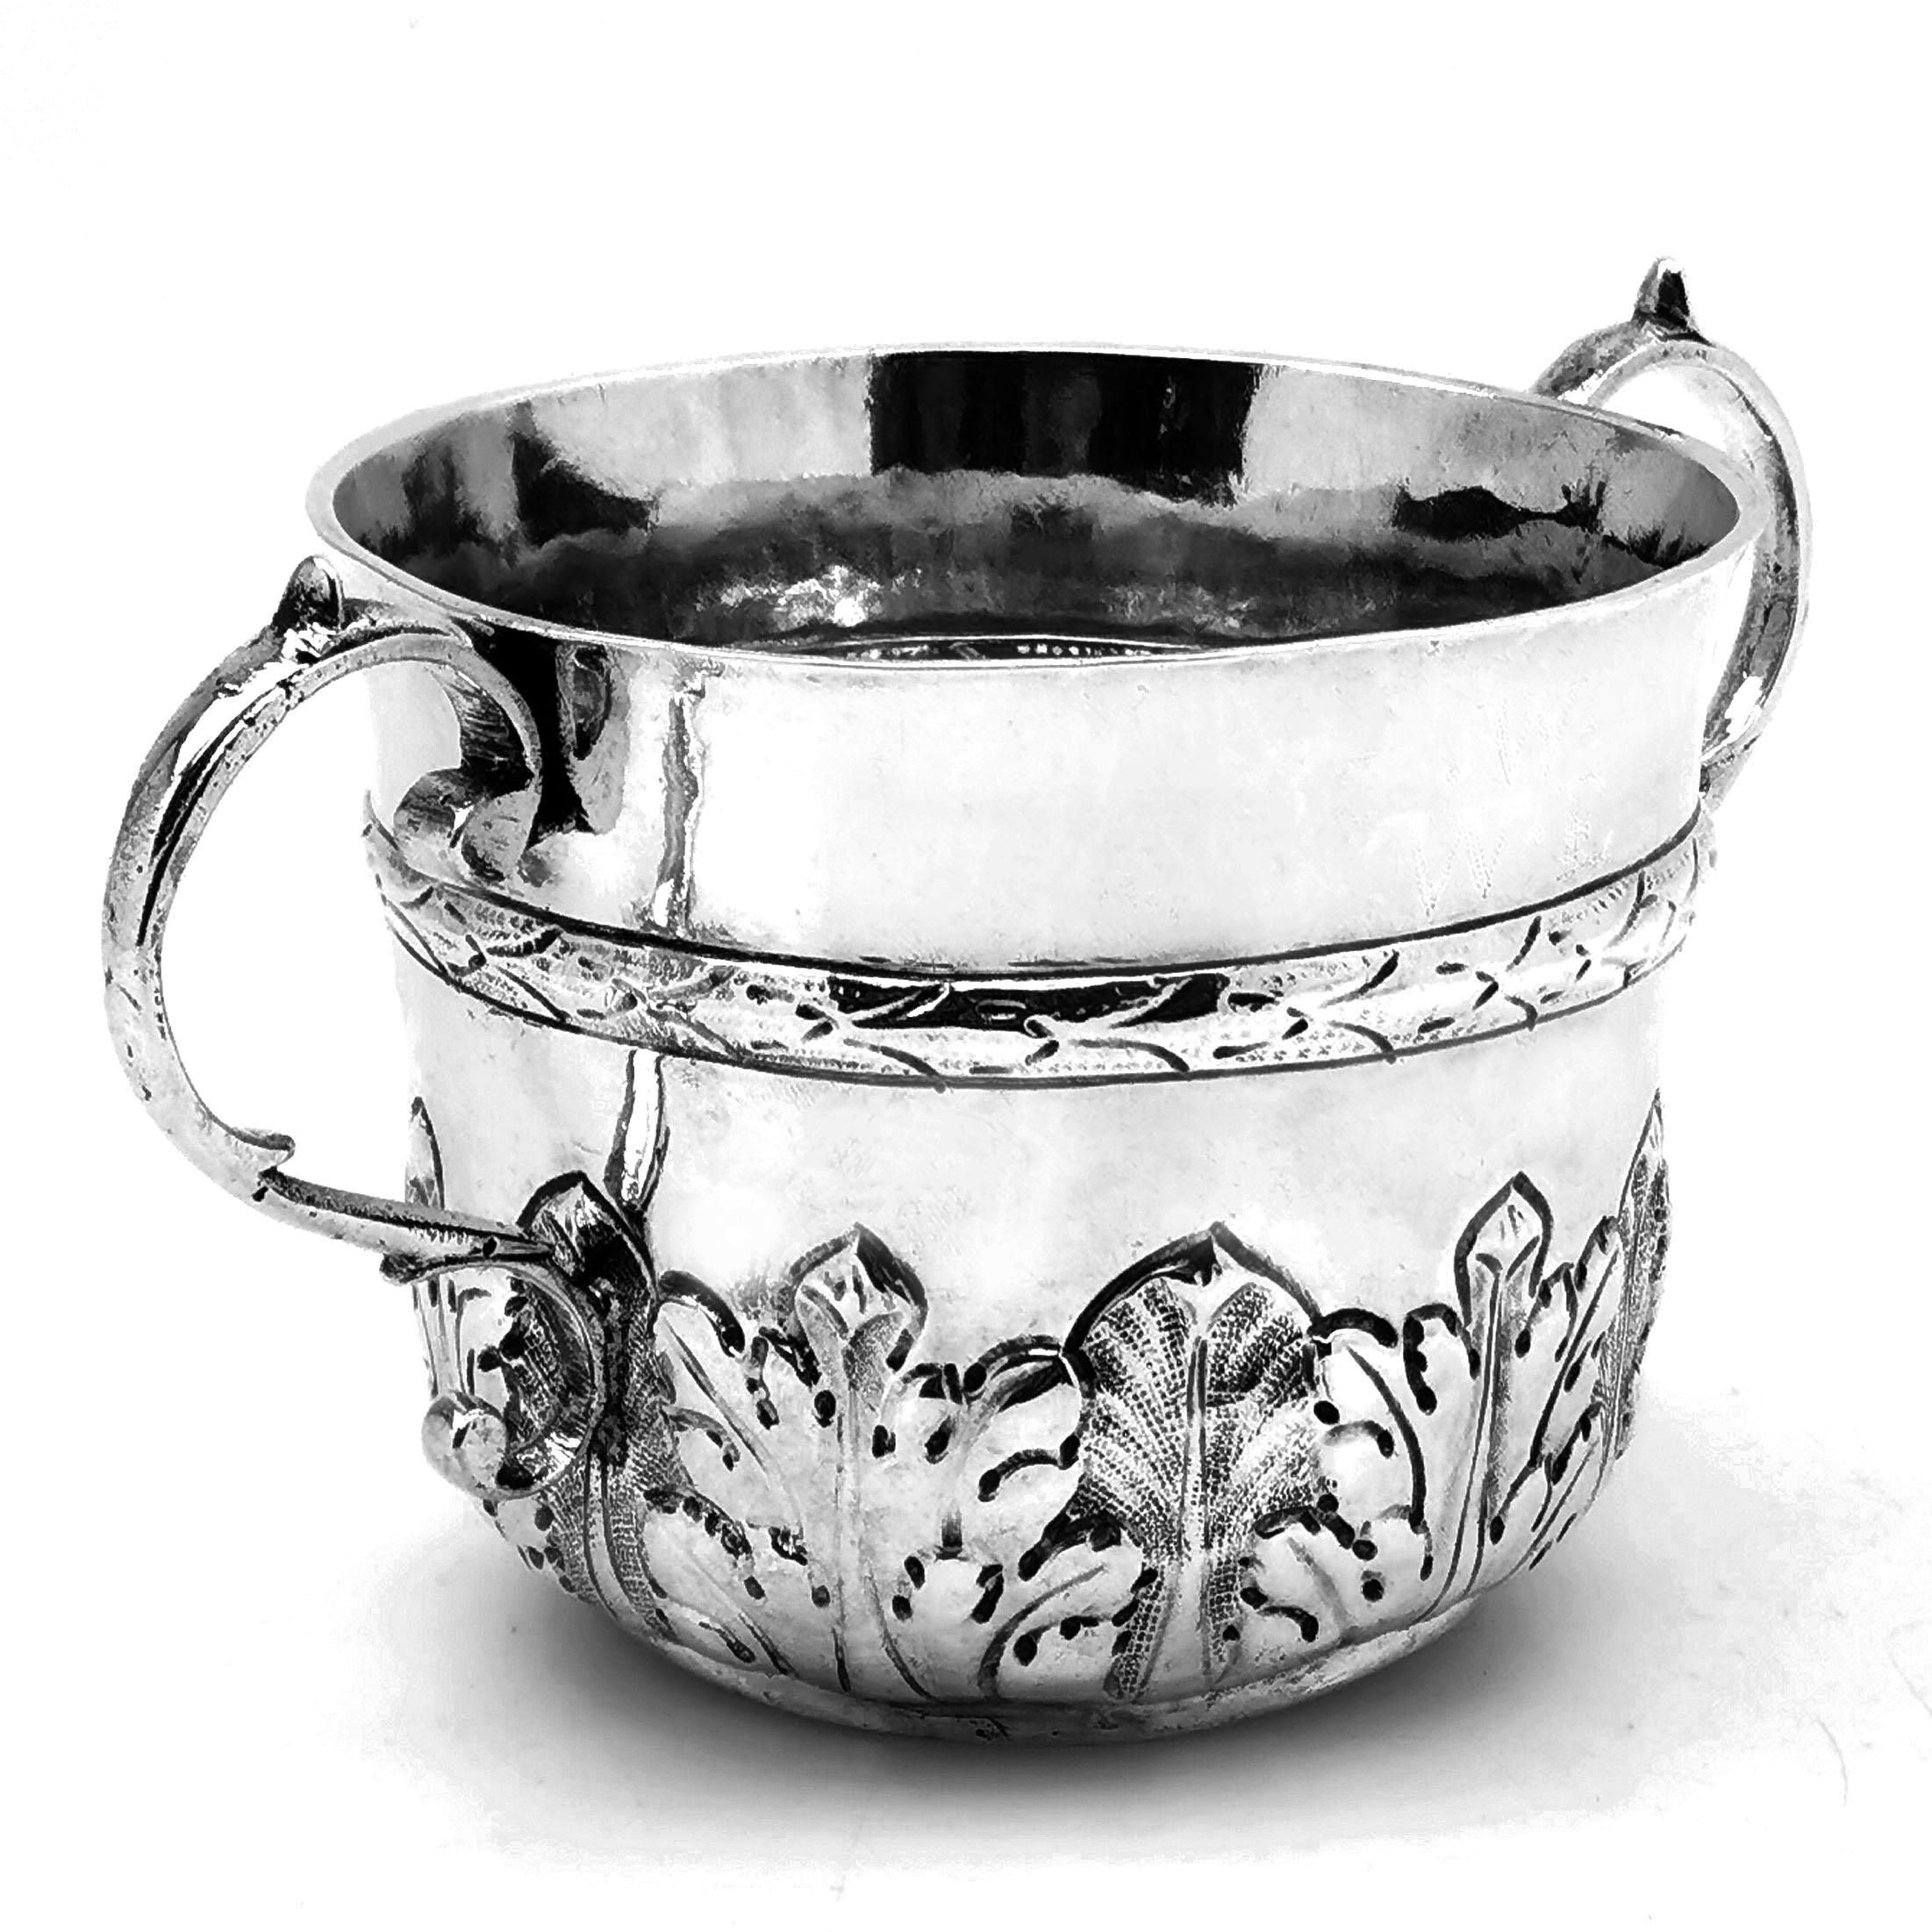 A lovely Antique 17th century James II solid Silver Porringer, decorated with a band of stylised leaf patterns around the lower half of the body, below a wreath style band around the centre. The Porringer has a pair of classic scroll handles and is